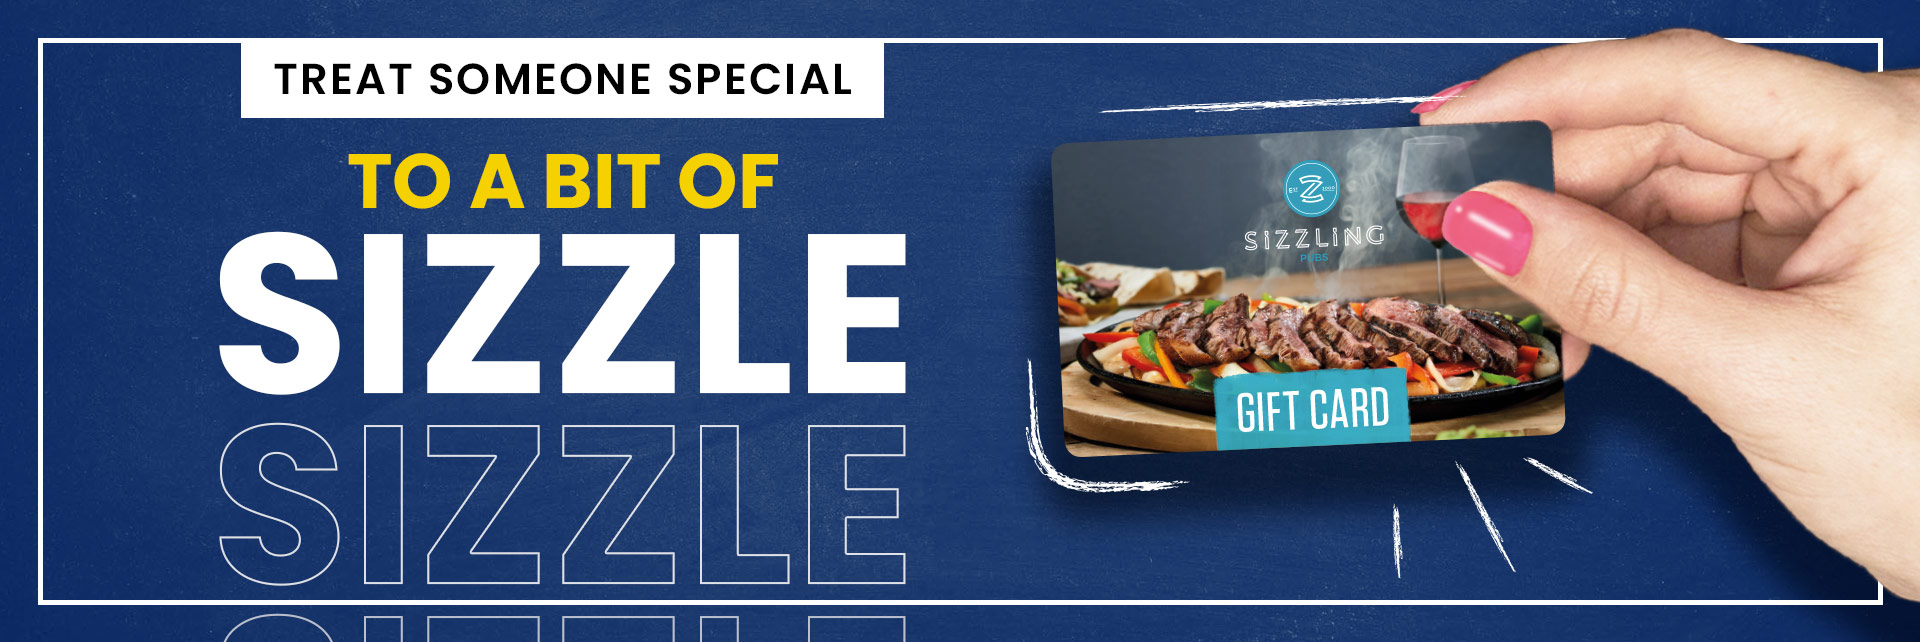 Sizzling Pubs Gift Card at The Blackberry Jack in St Albans